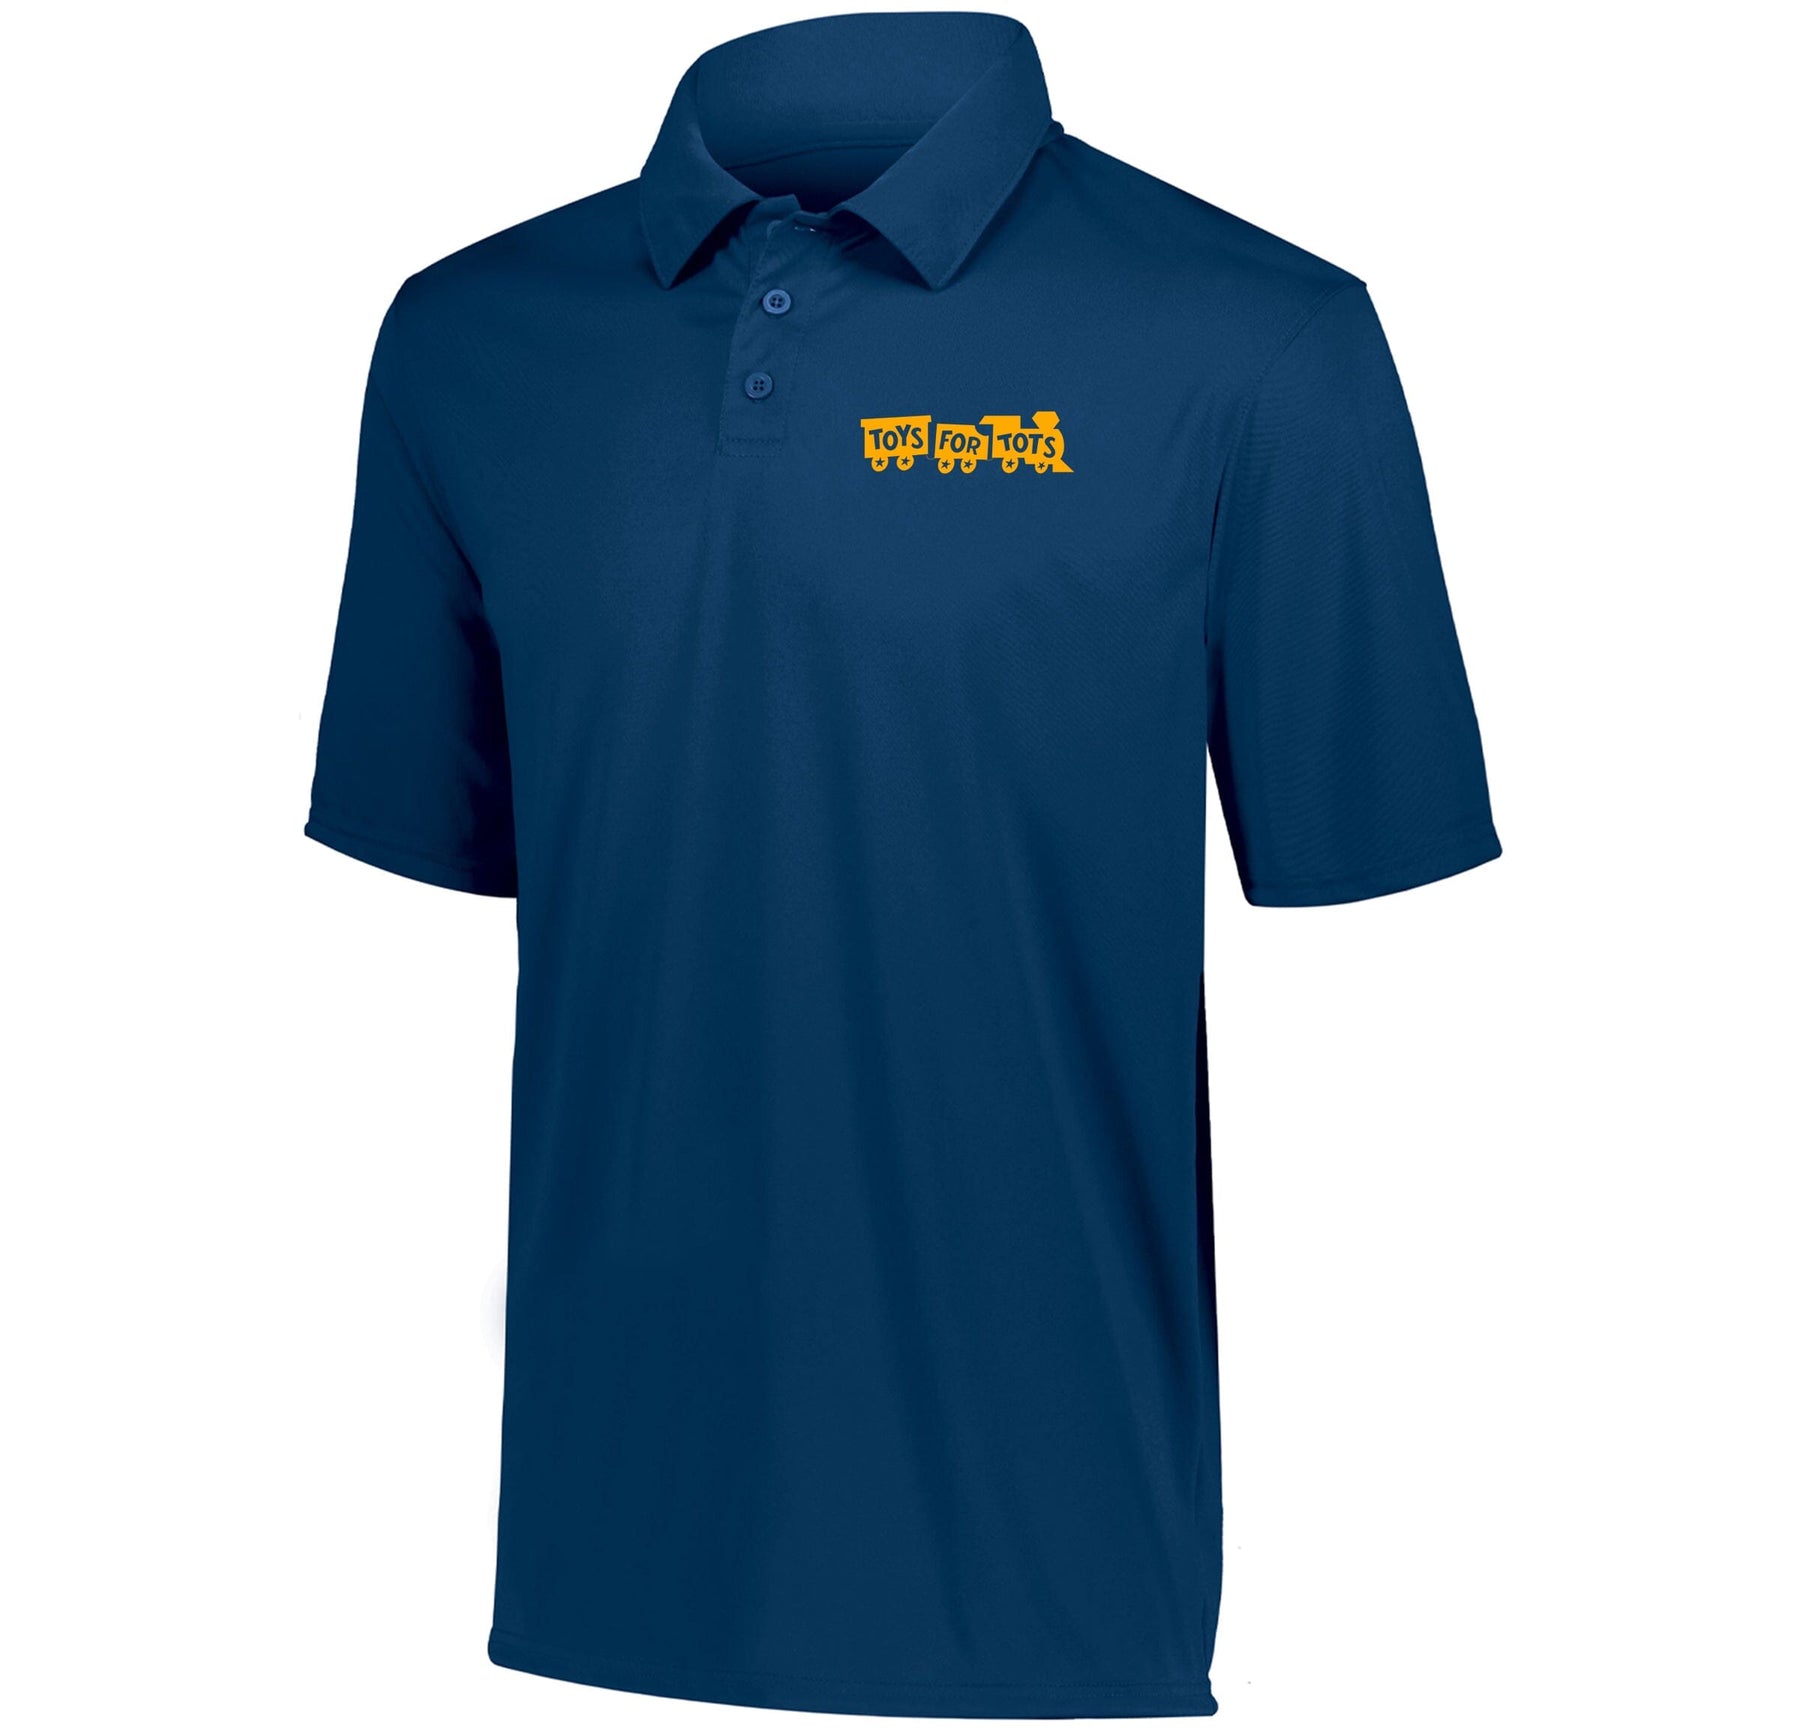 Gold TFT Chest Seal Screen-Printed Dri-Fit Performance Polo Polo Marine Corps Direct S NAVY 